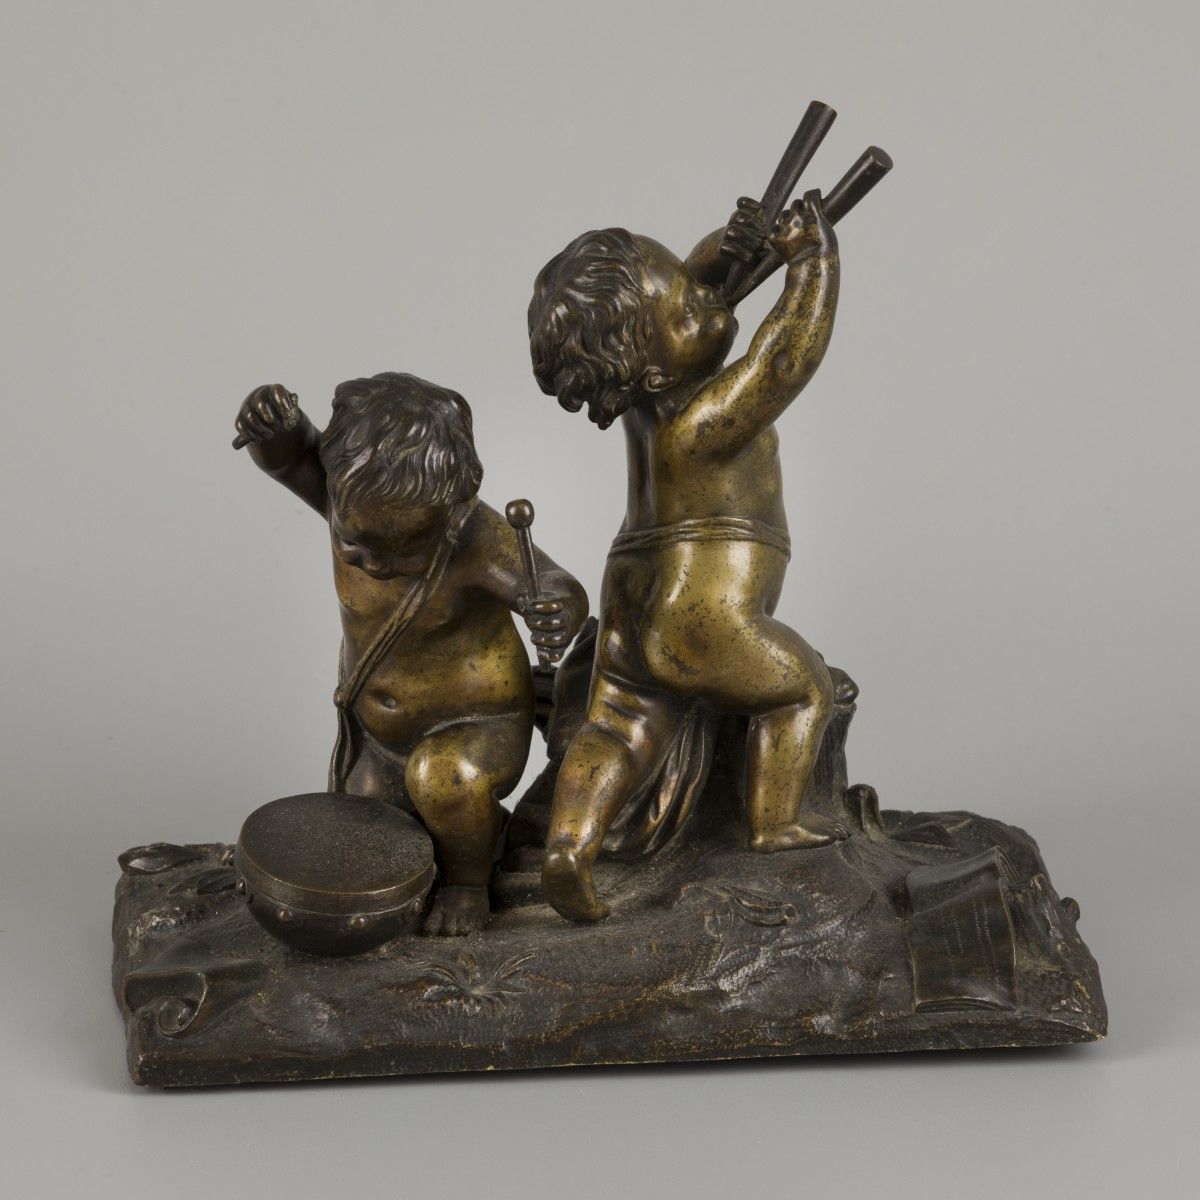 A bronze group with putti playing instruments. 缺少一个鼓槌。高19厘米。估计：80 - 120欧元。